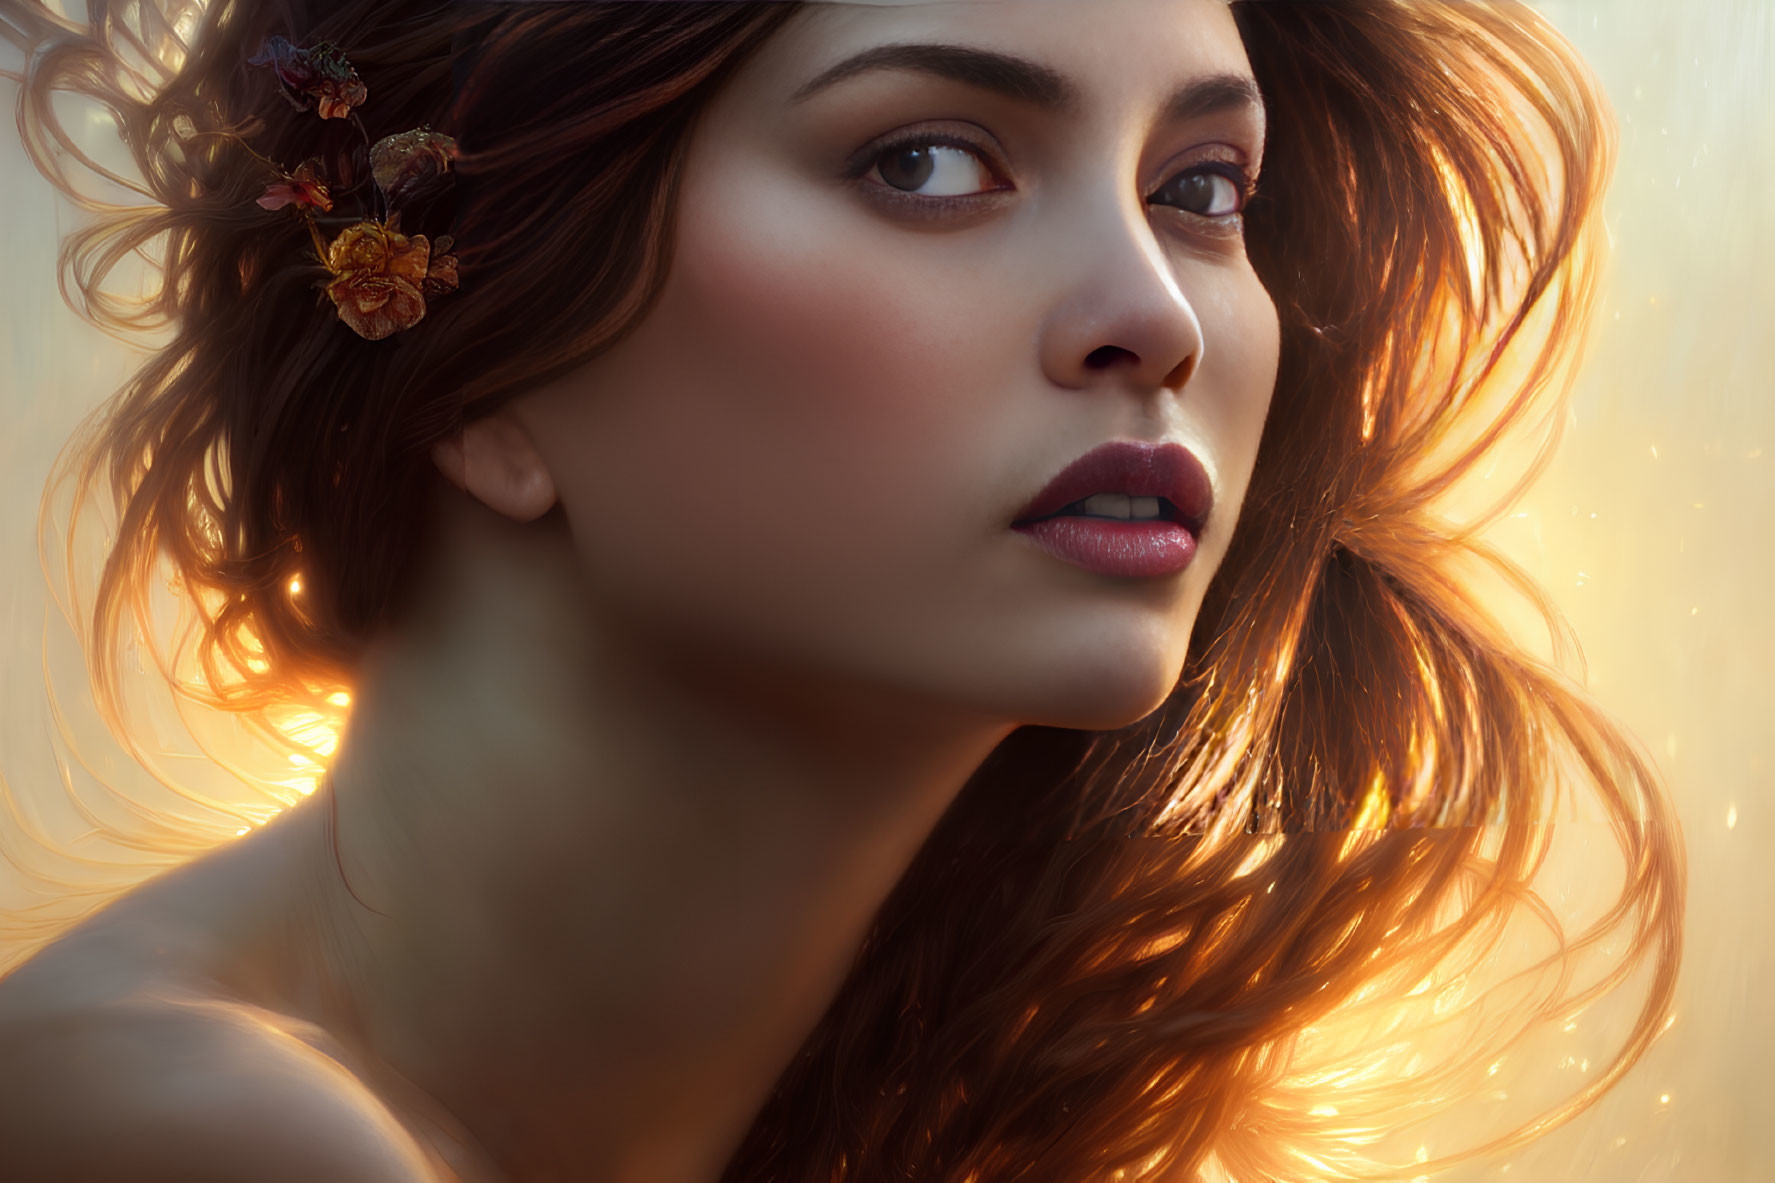 Close-up portrait of woman with glowing skin and flowers in hair